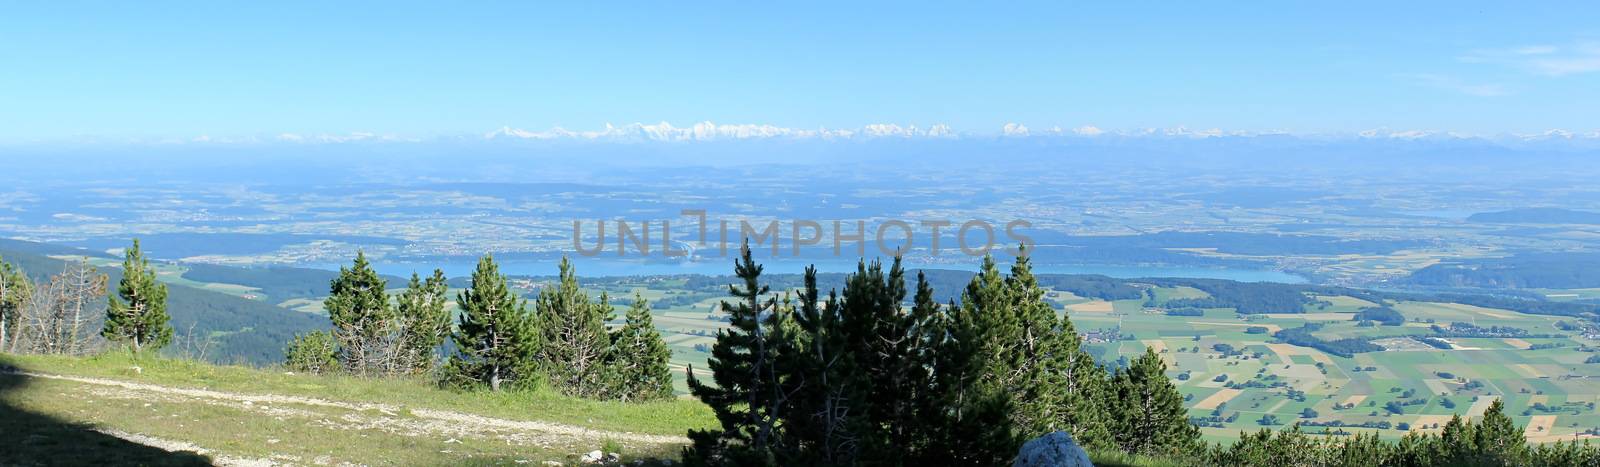 View of Alps mountain from Chasseral, Switzerland by Elenaphotos21